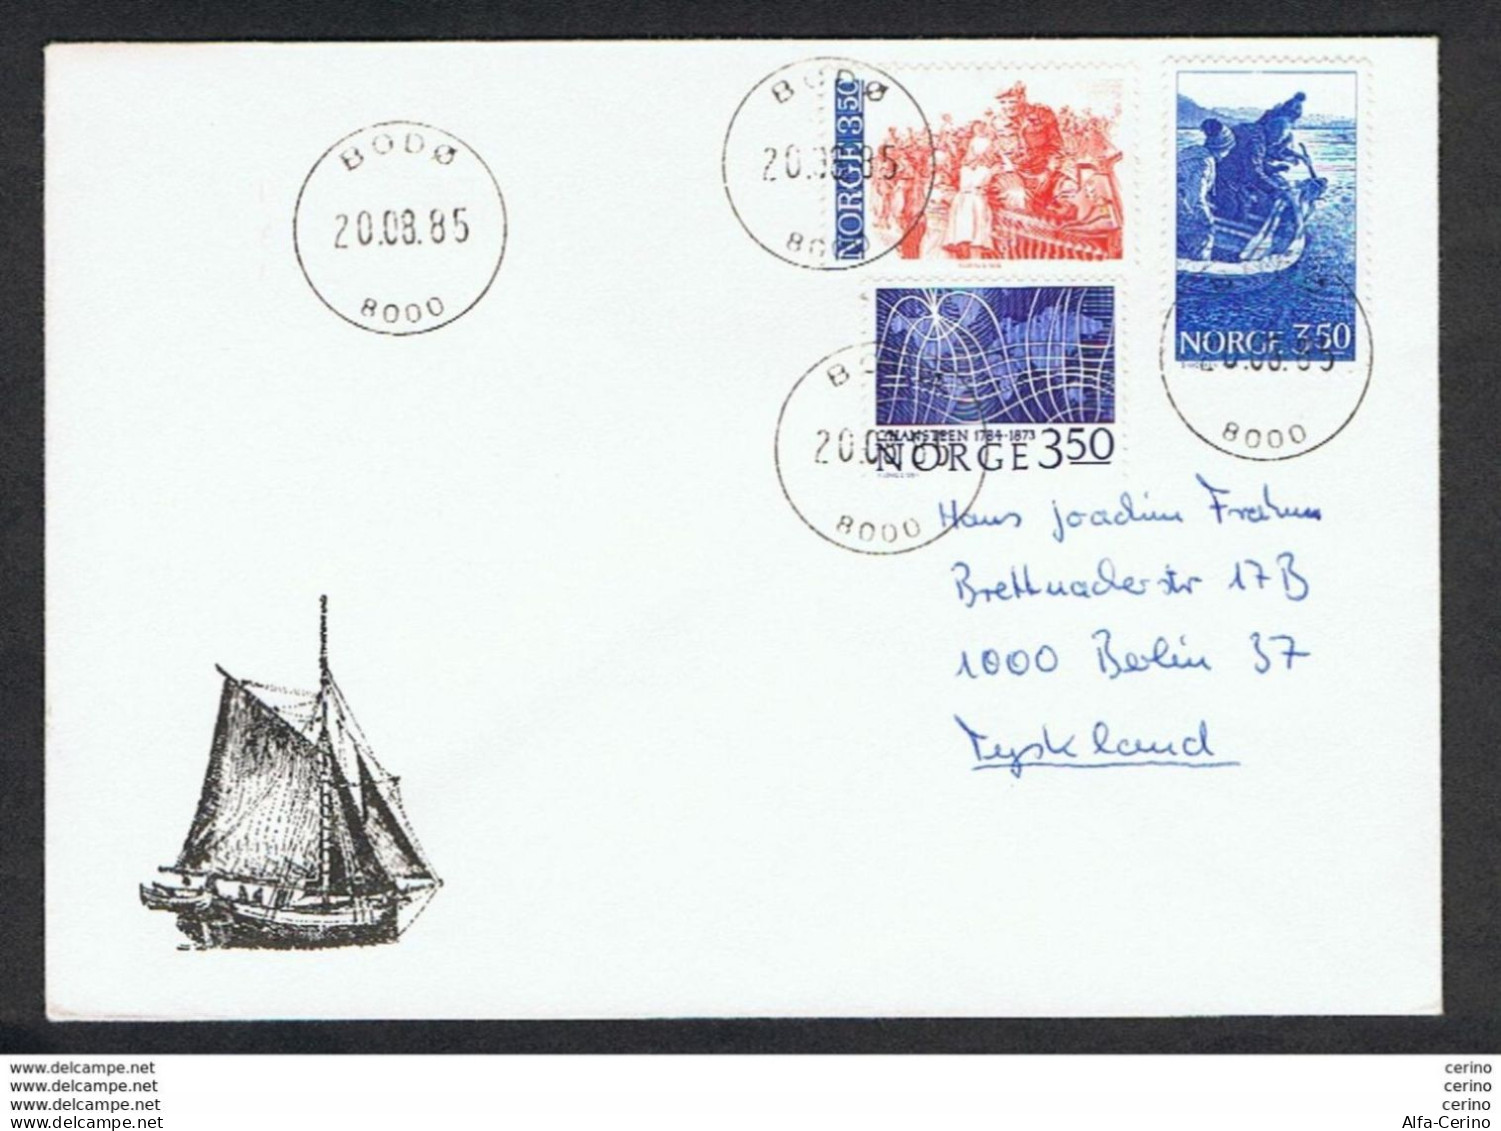 NORWAY: 20.08.1985 COVERT FROM BODO WITH:  3 K.50 + 3 K.50 + 3 K.50 (857 + 858 + 876) - TO GERMANY - Cartas & Documentos